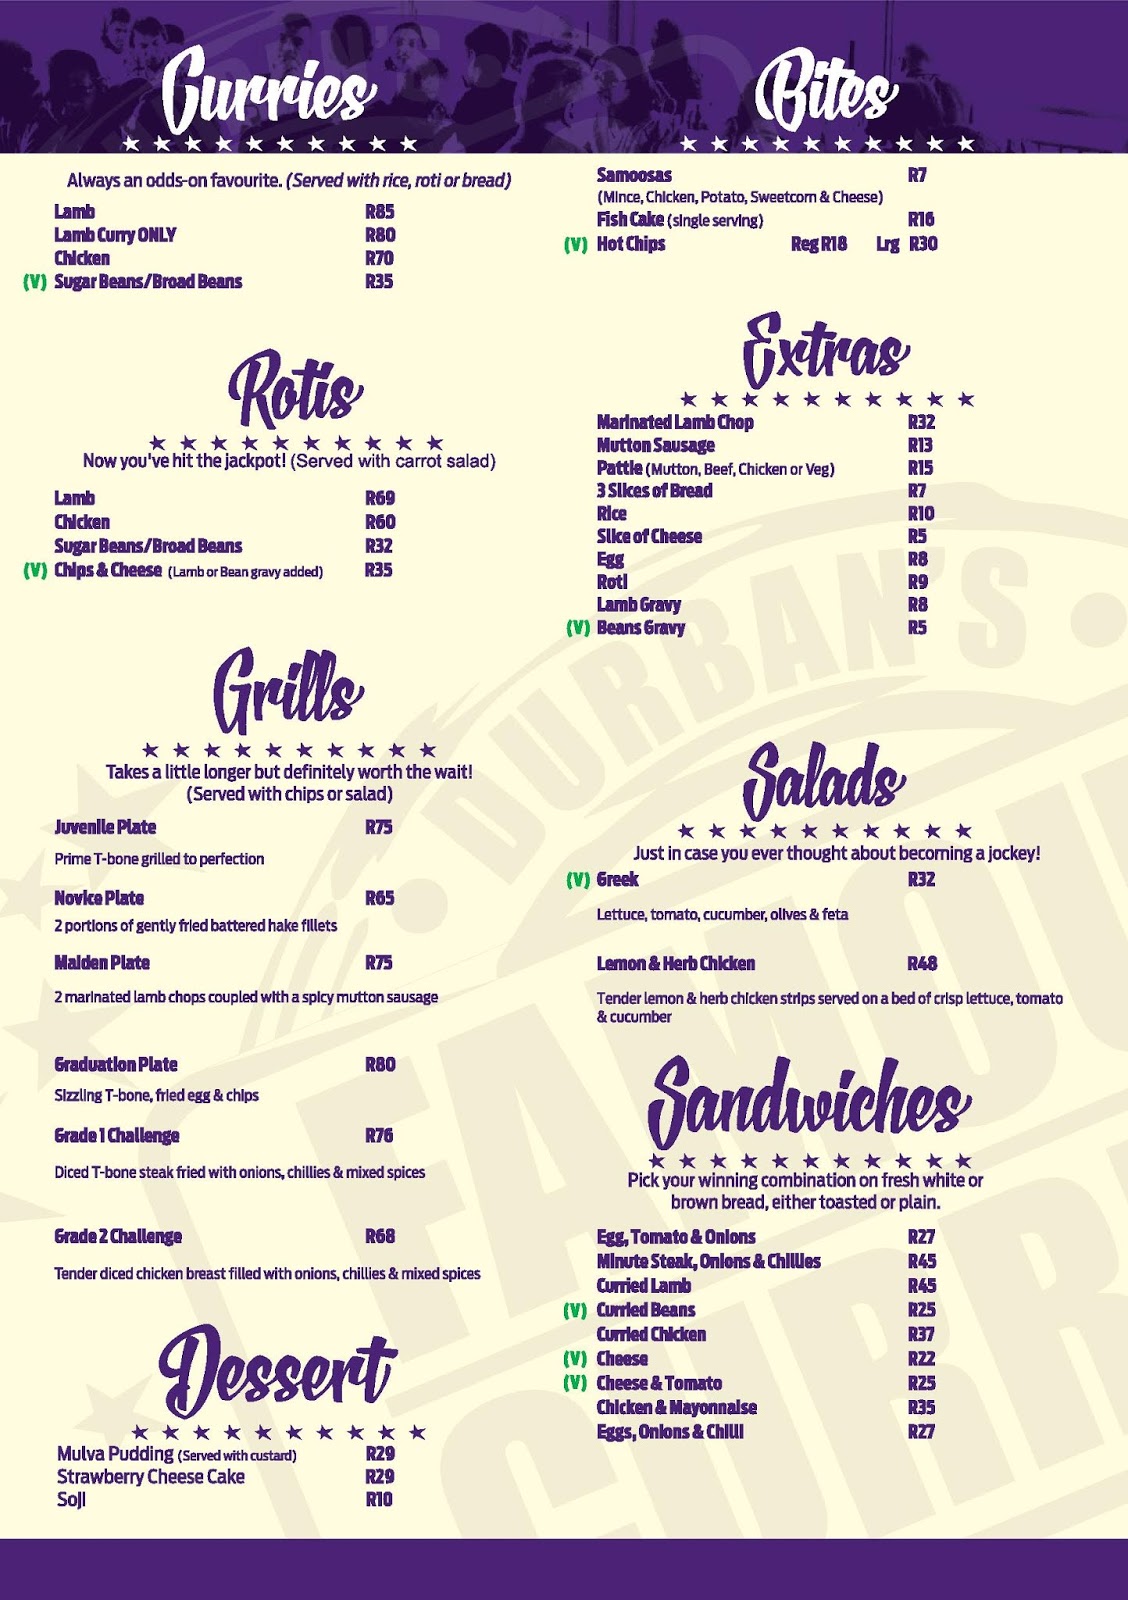 Hollywood Bunny Bar Menu - Page 2 - Curries, Rotis, Bites, Grills, Salads, Sanwdwiches, Dessert